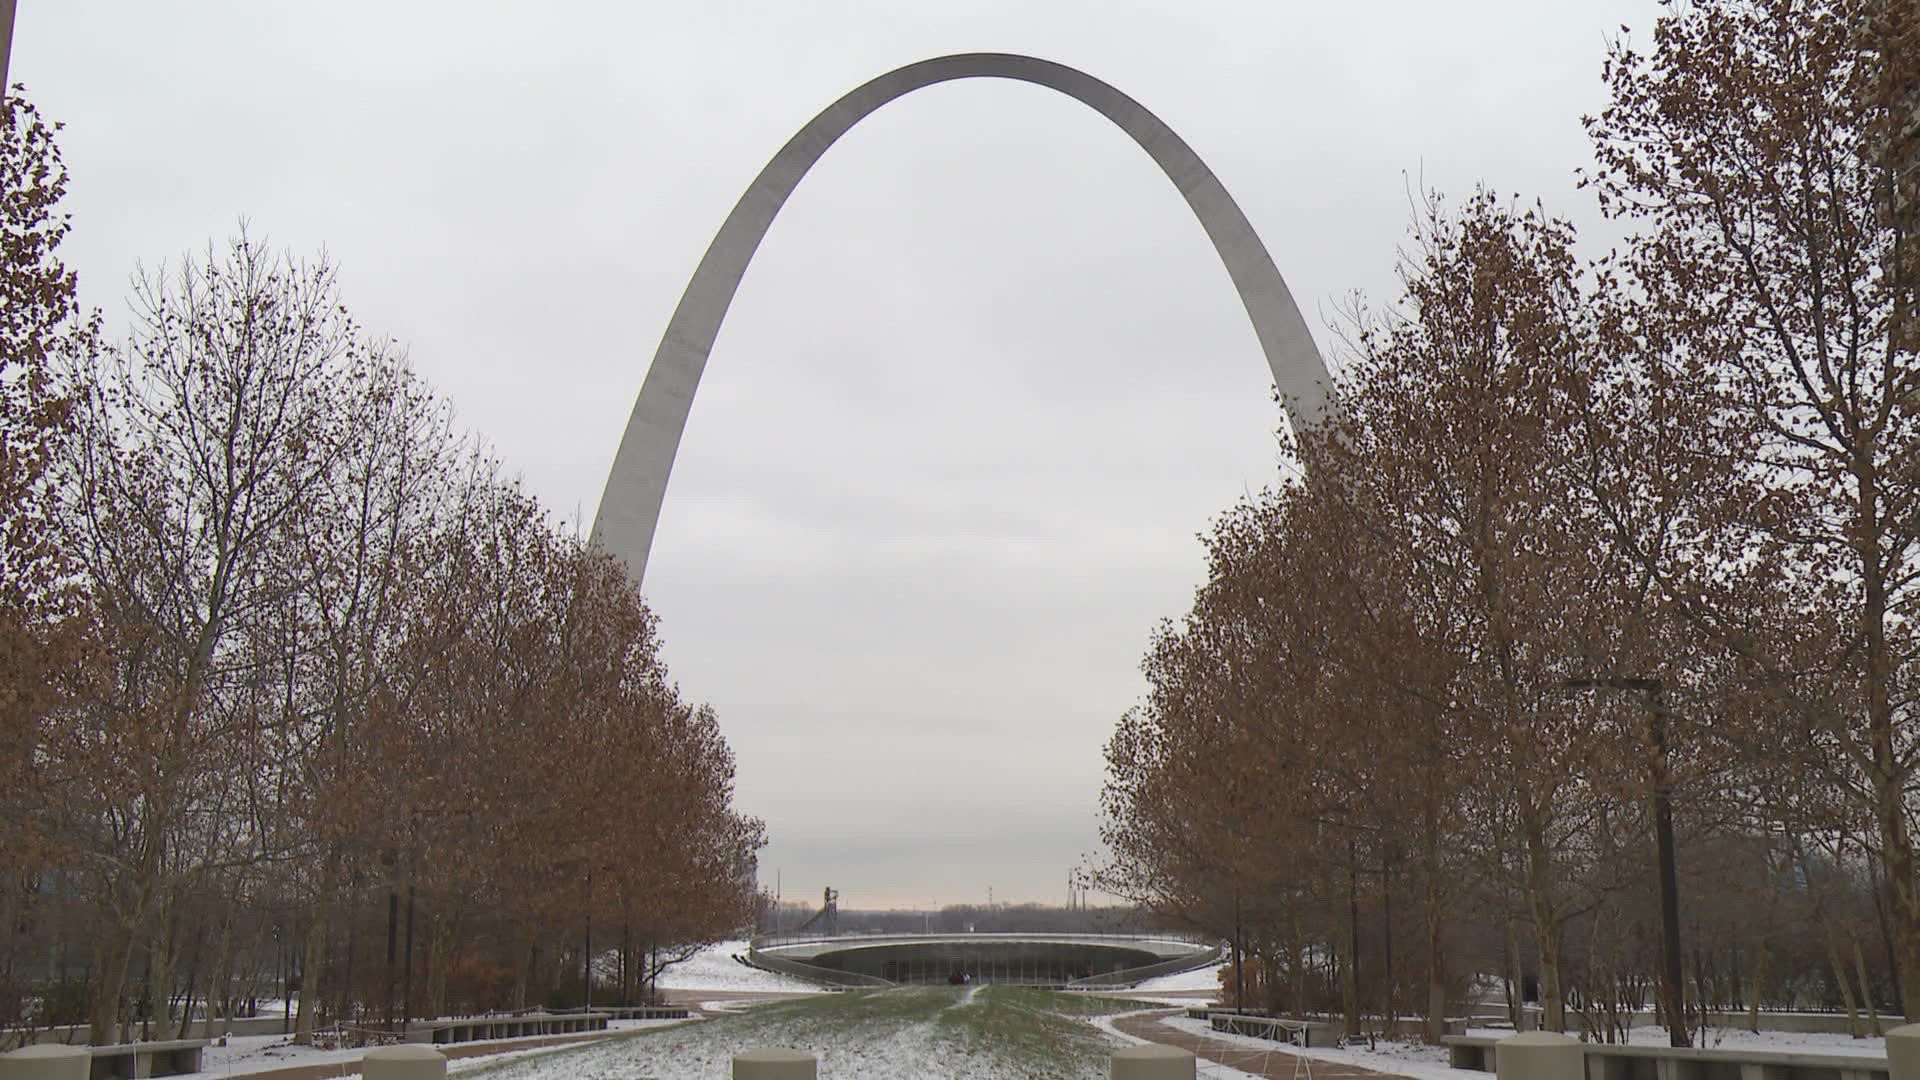 The Gateway Arch will require staff and visitors to wear face masks inside buildings on park grounds starting Tuesday. Masks will be available to visitors for free.